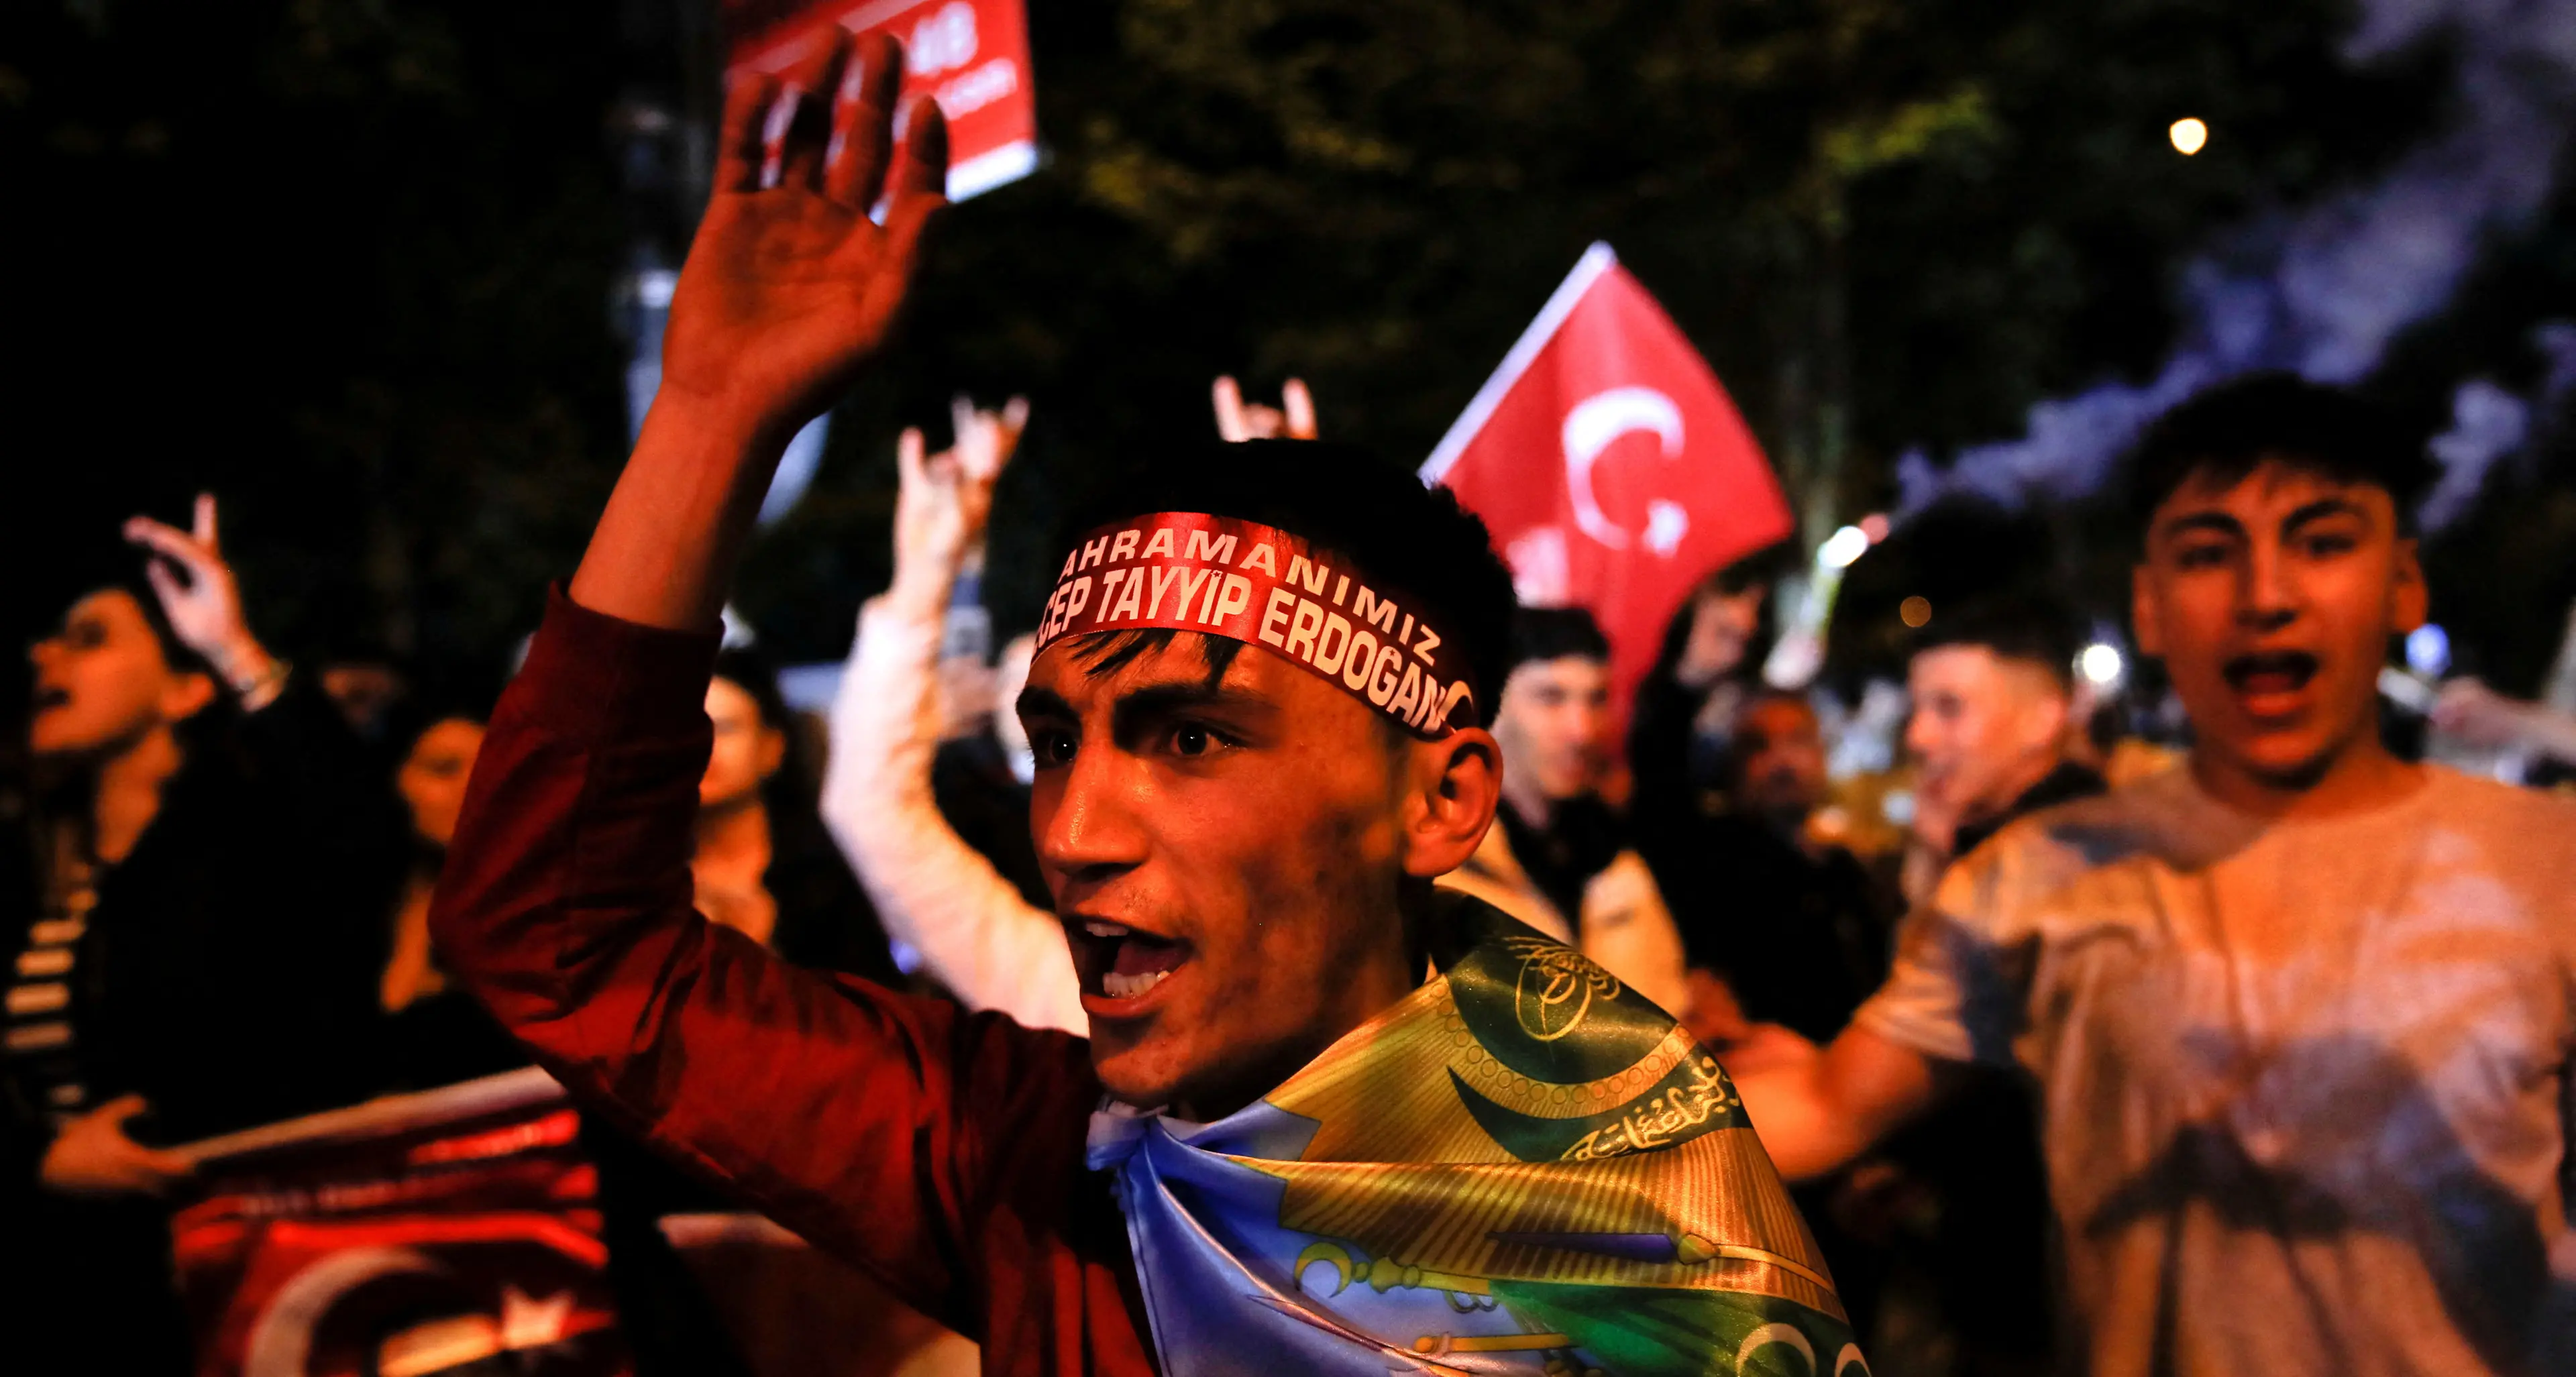 Investors advised to “brace for volatility” ahead of Turkish electoral runoff